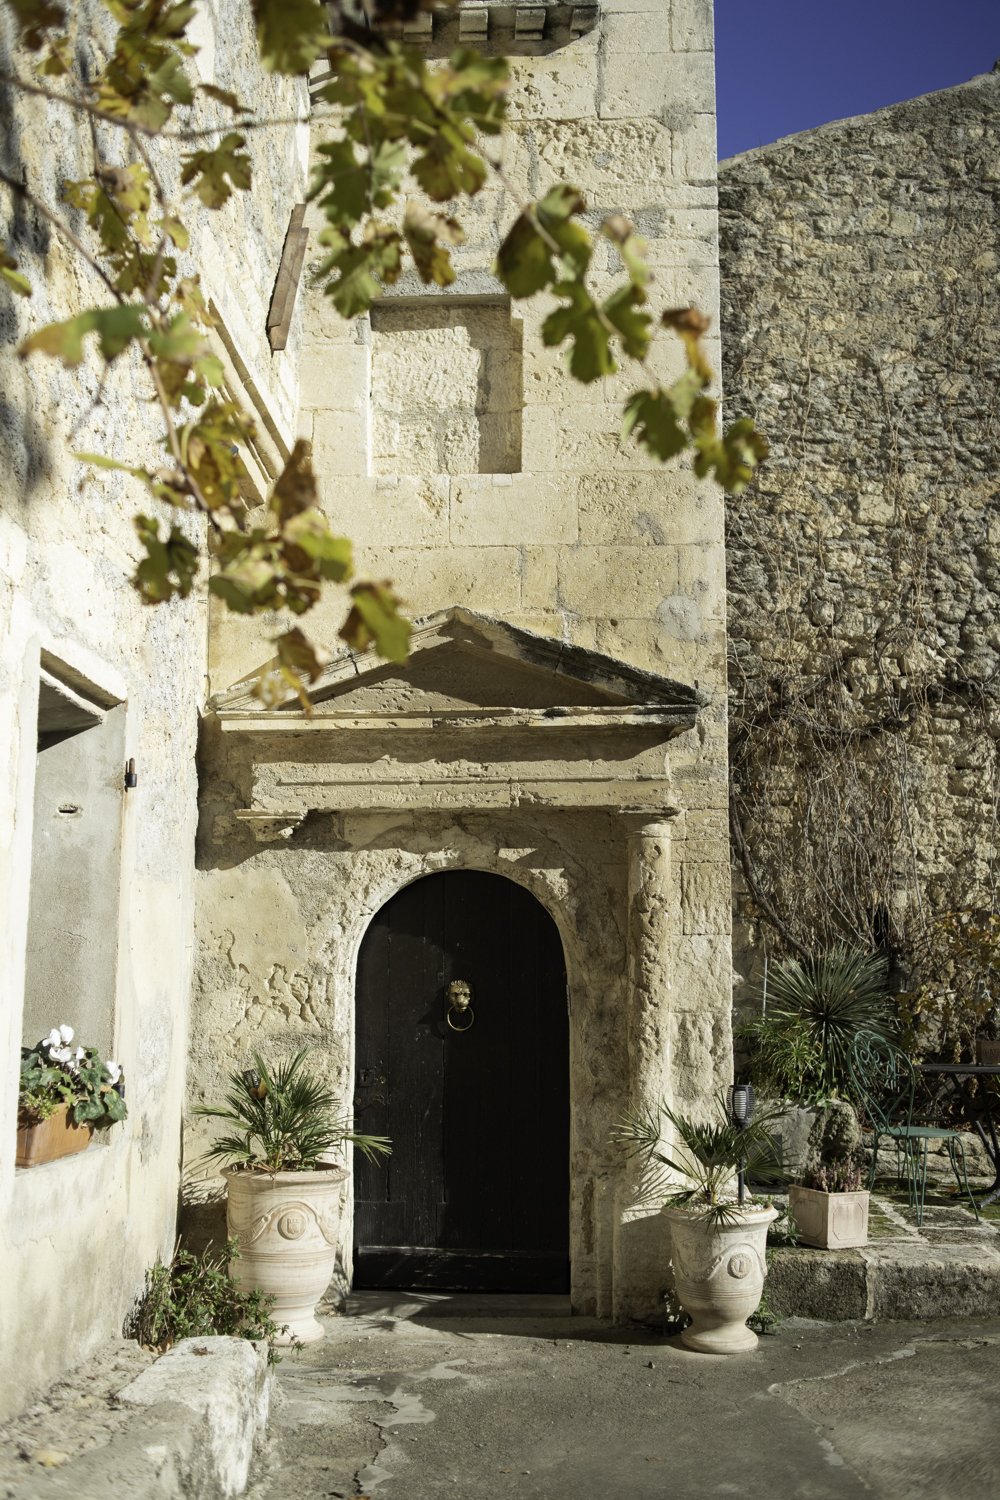 Francis York Dream 18th Century Renovated 12th Century Castle and Wine Estate in Provence, France 00006.jpg